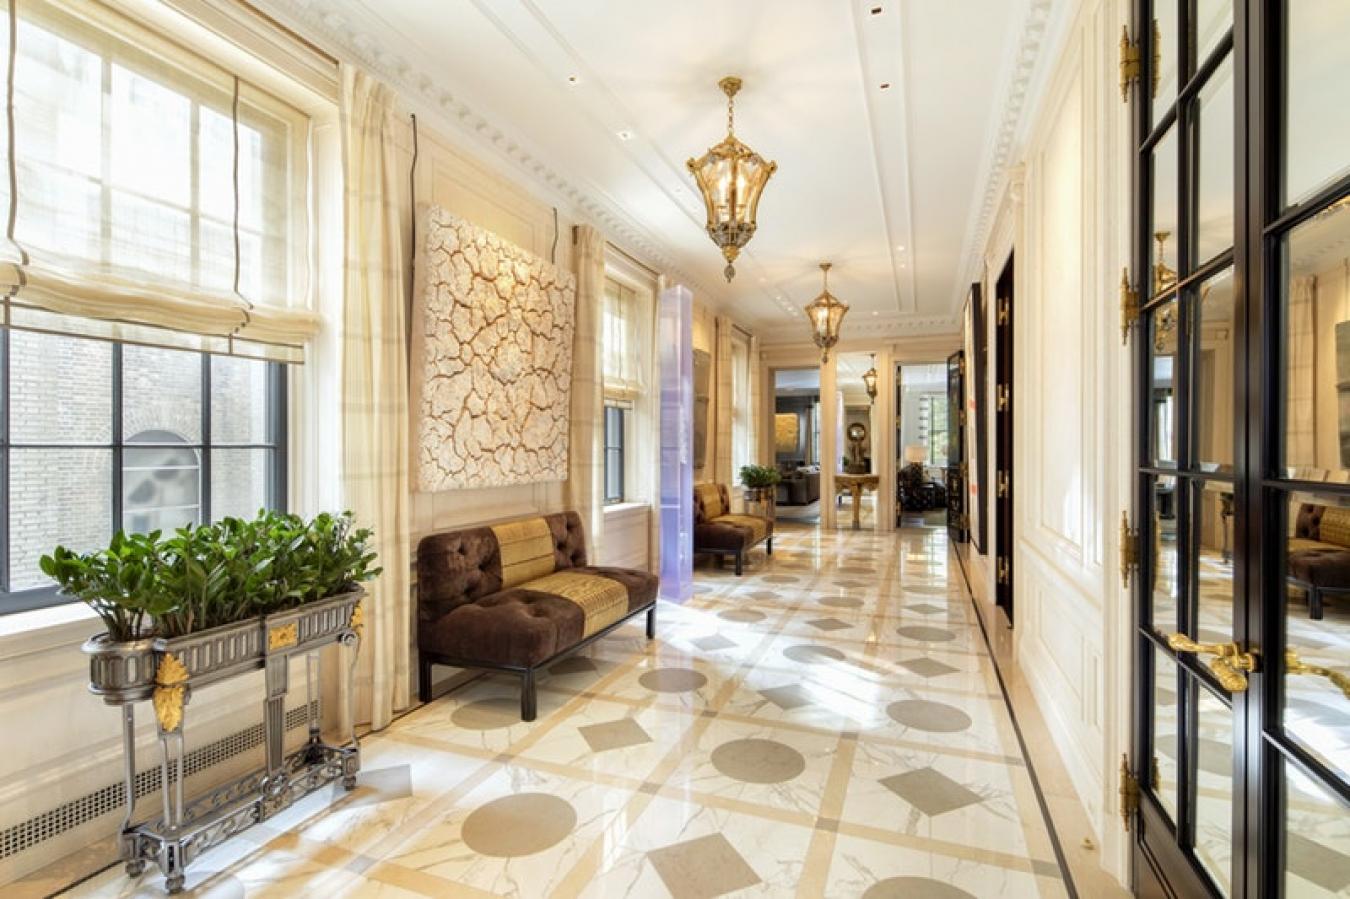 4 East 66th Street, New York, New York, 10065, United States, 5 Bedrooms Bedrooms, ,8 BathroomsBathrooms,Residential,For Sale,4 East 66th Street,912867